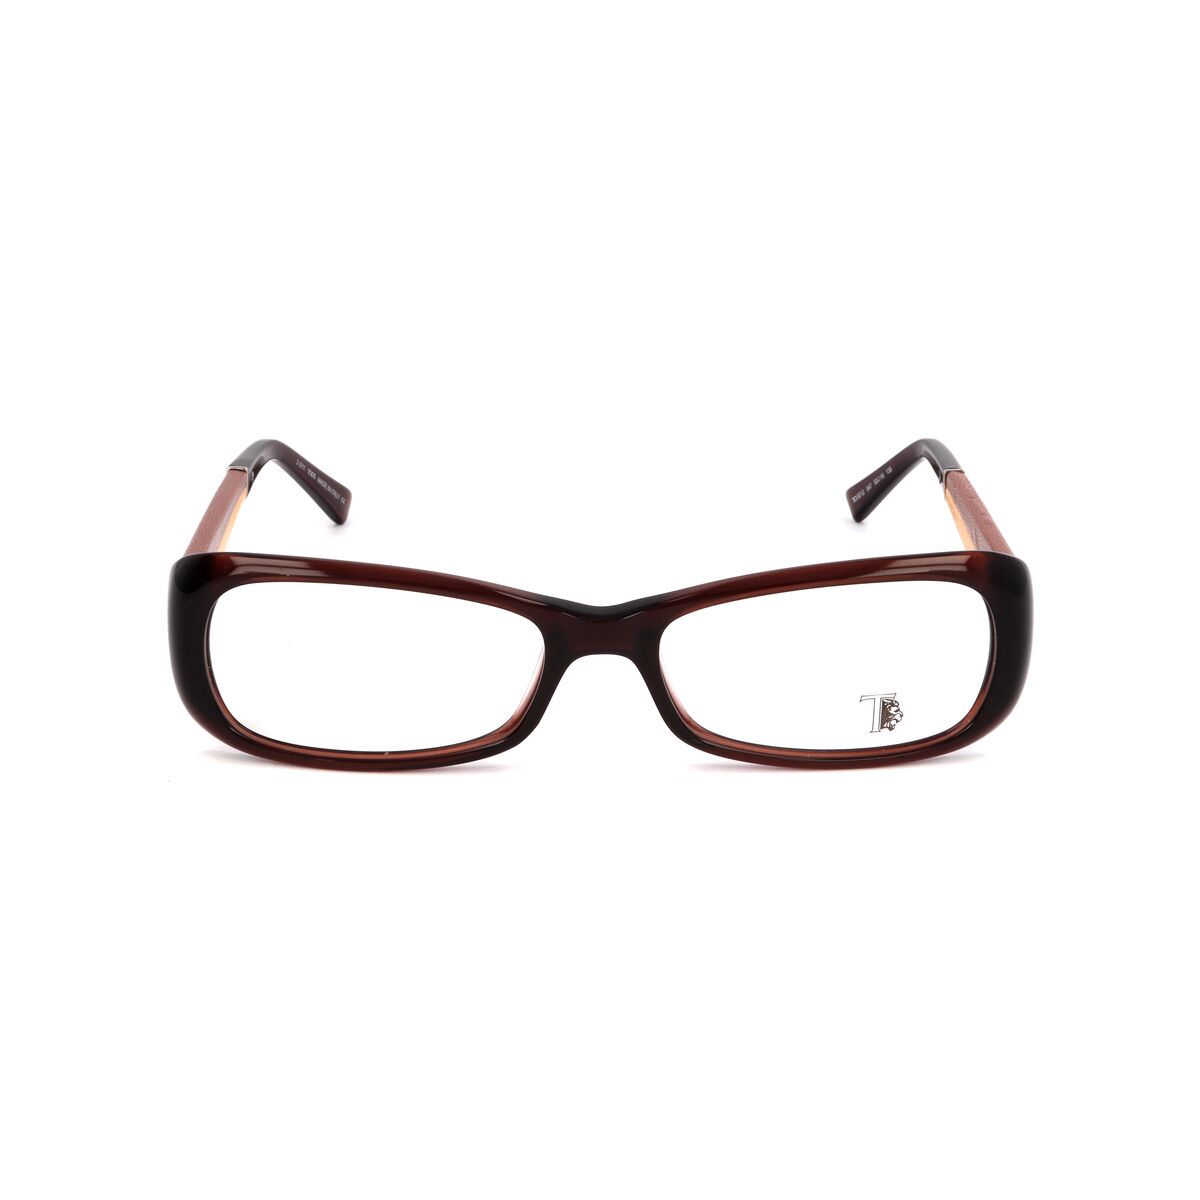 Ladies'Spectacle frame Tods TO5012-047-53 Brown